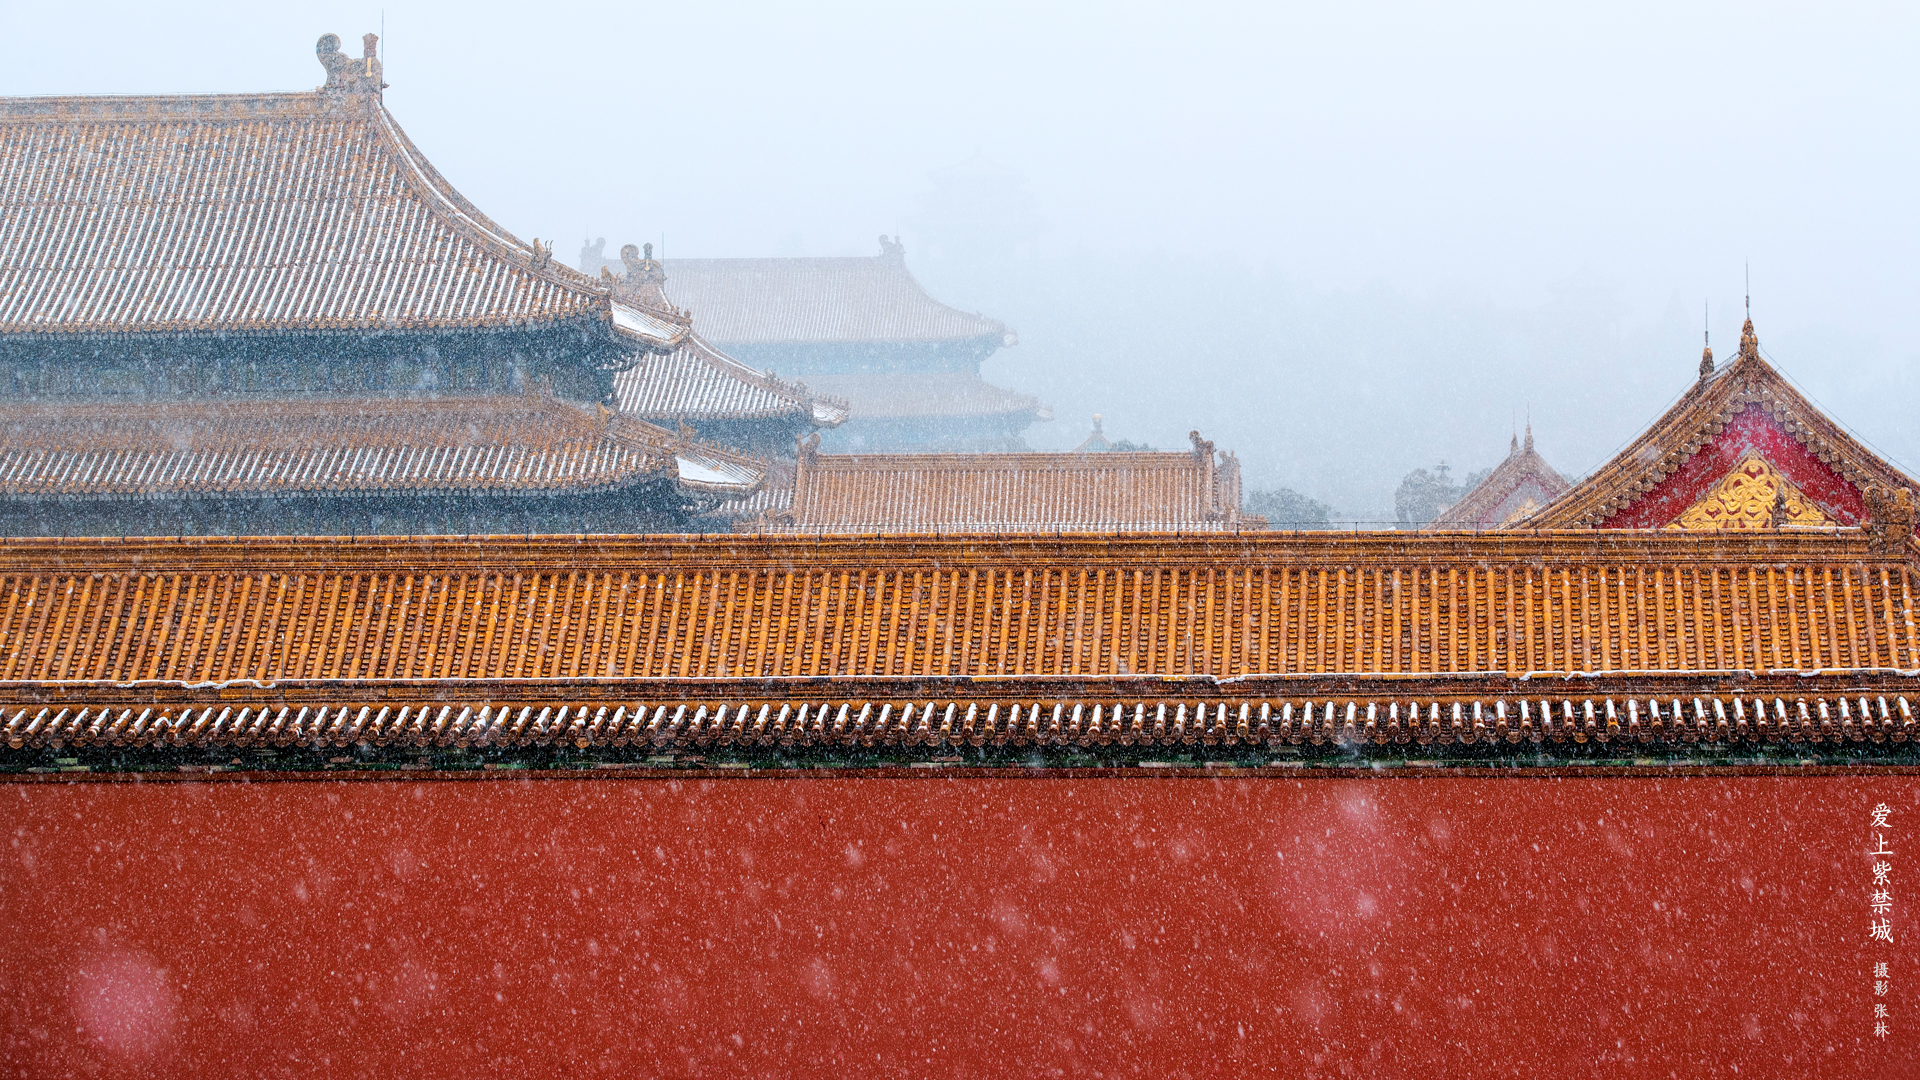 General 1920x1080 China Asia snow wall Asian architecture